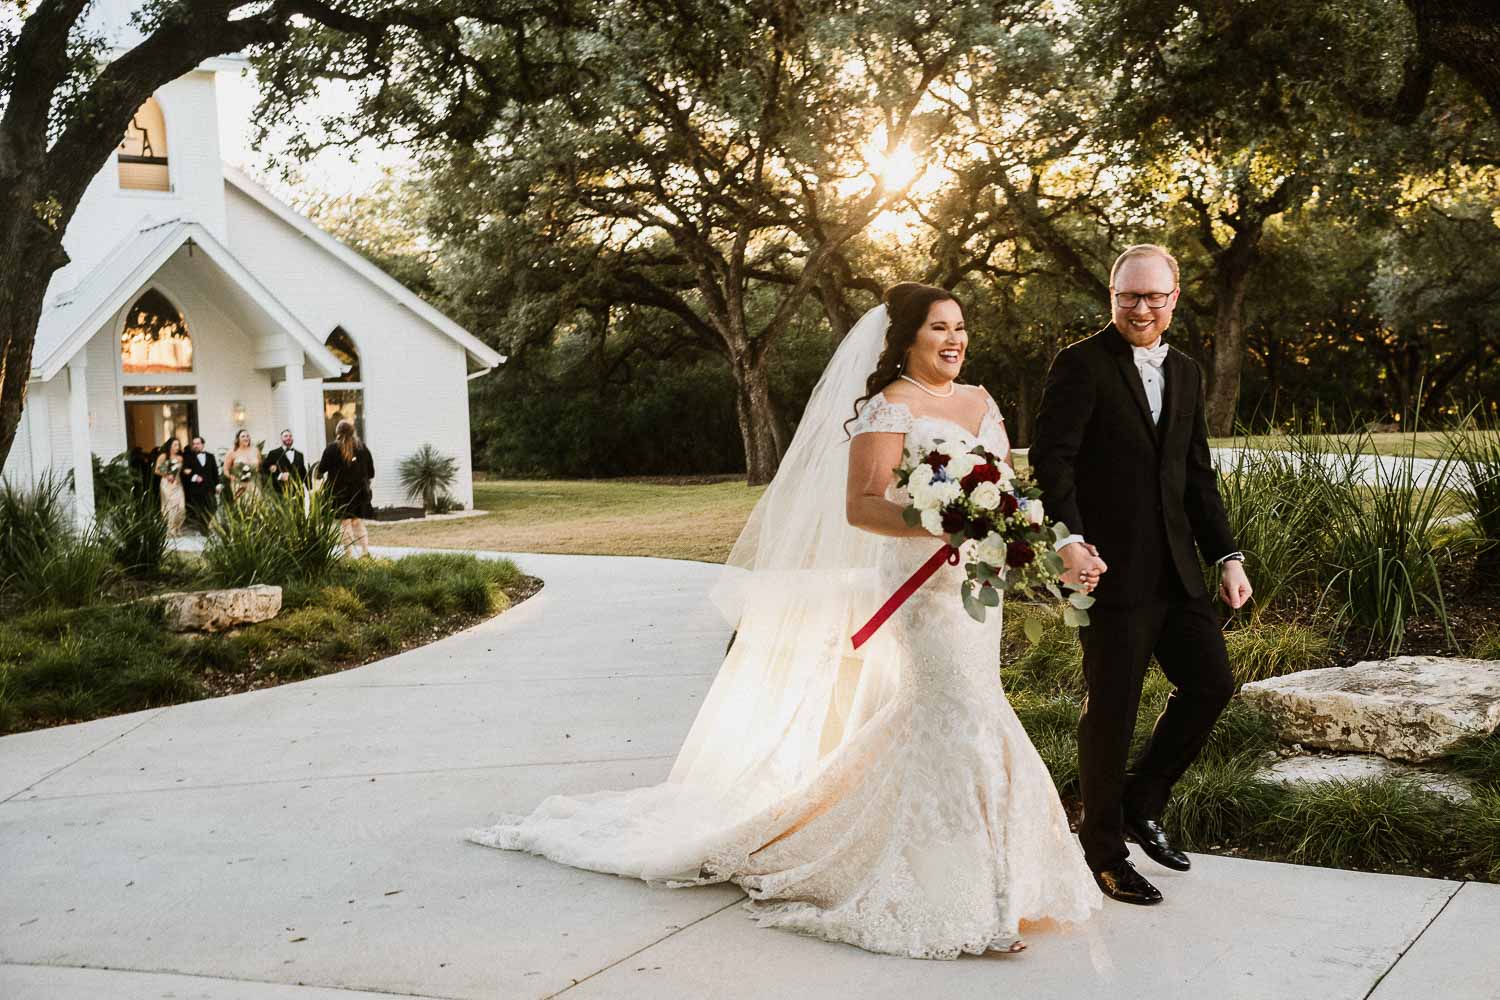 Clearly over the moon, Andrea and James just tied the knot at sunset, The Chandelier of Gruene Weding Photos -L1004065-Philip Thomas Photography